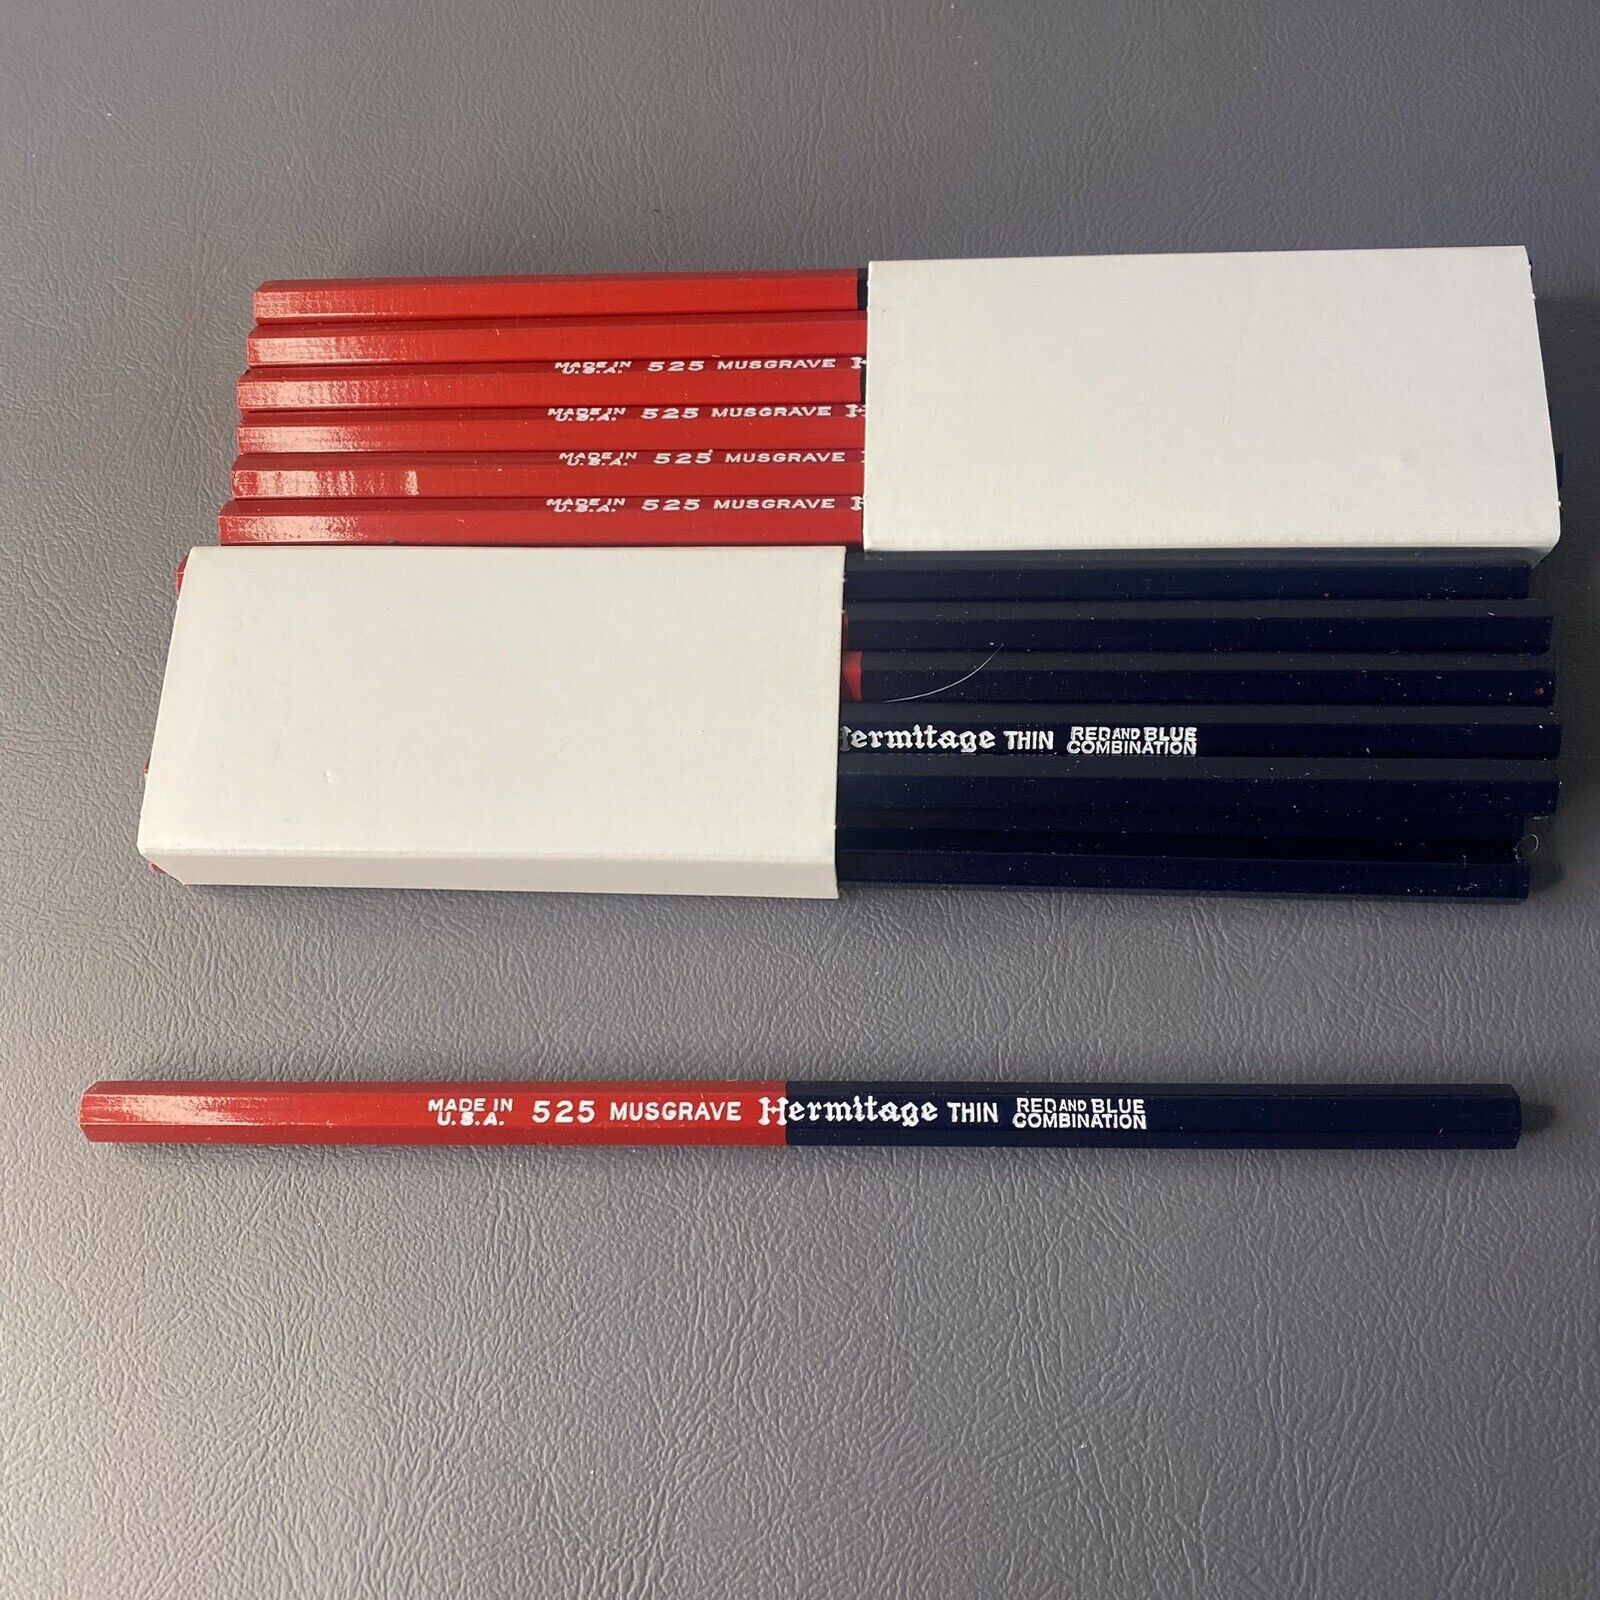 24 Pc Red and Blue Combination Pencils Musgrave Hermitage 525 Thin Made In U.S.A